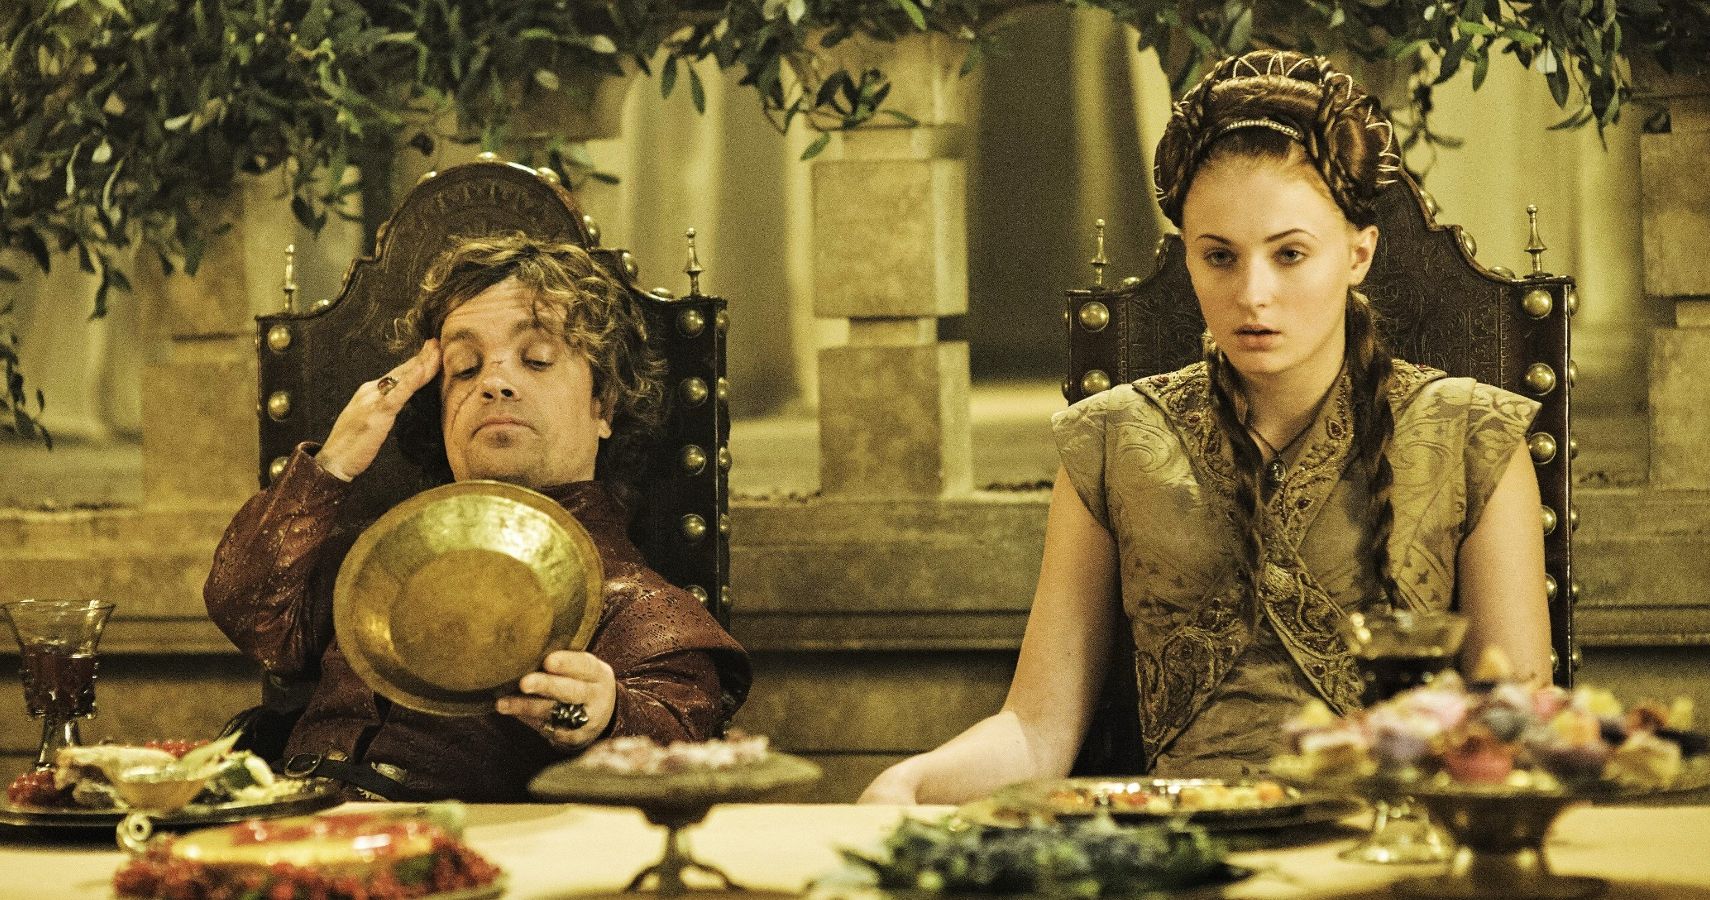 Game of Thrones 5 Worst Things Tyrion Did To Sansa (& She Did To Him)